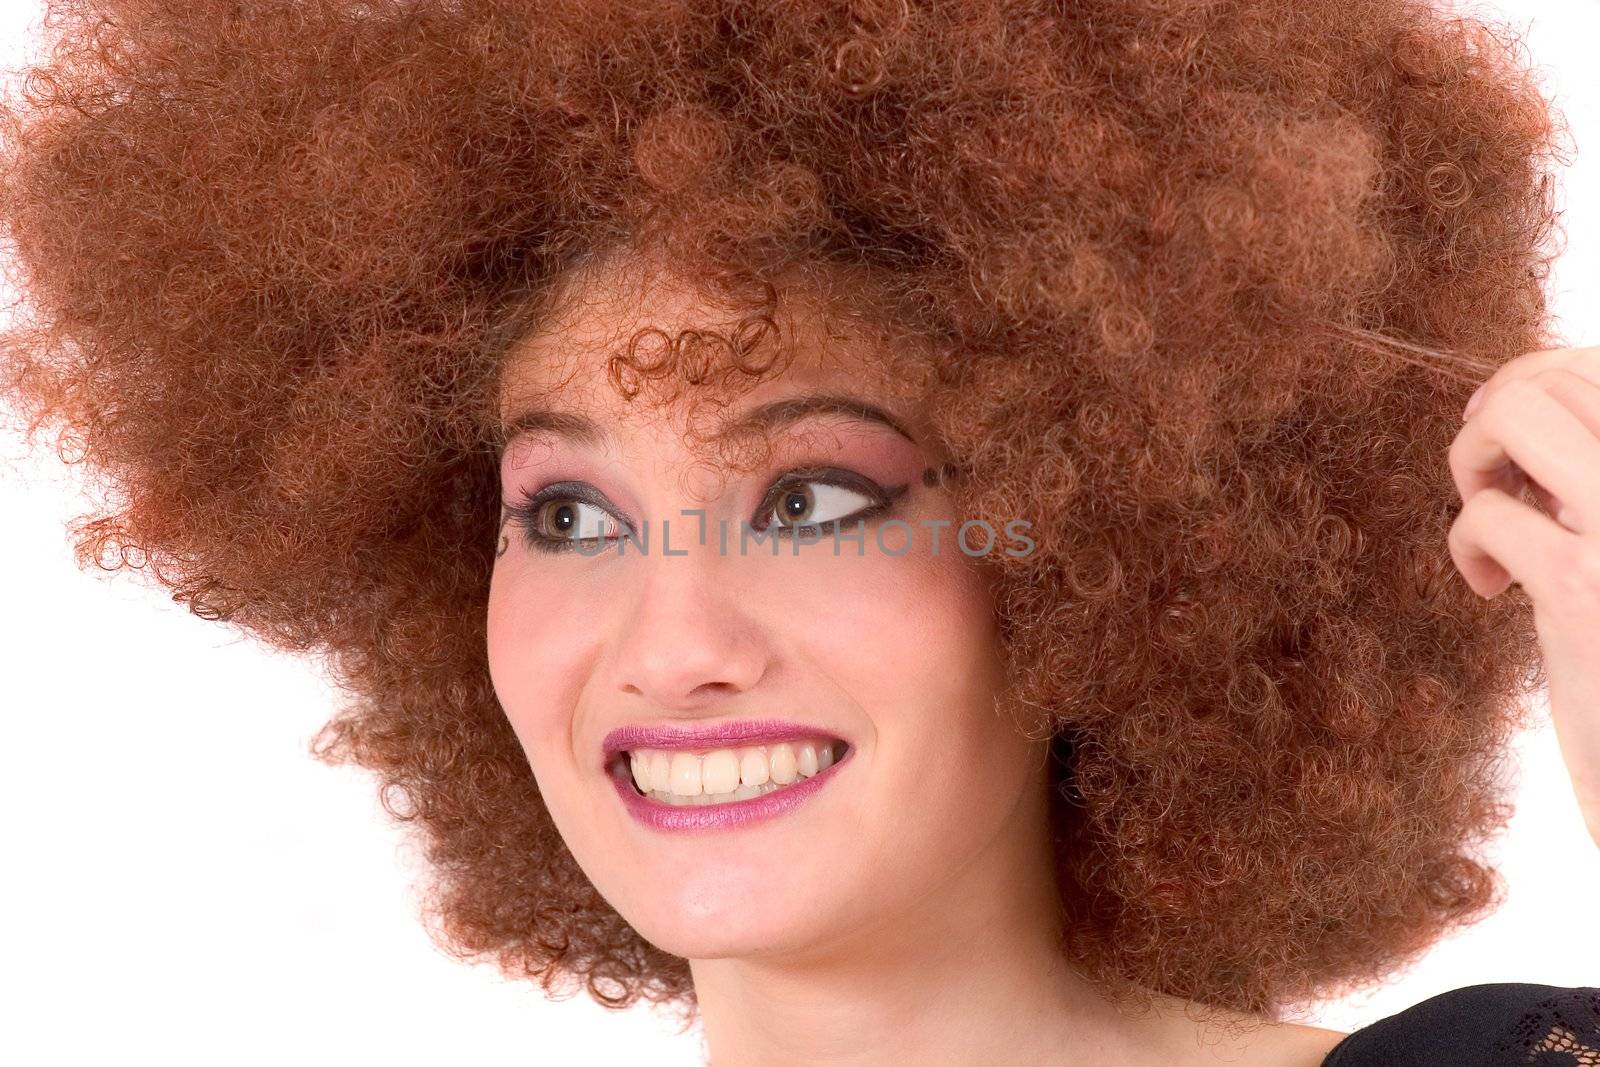 Pretty teen with a red afro wig